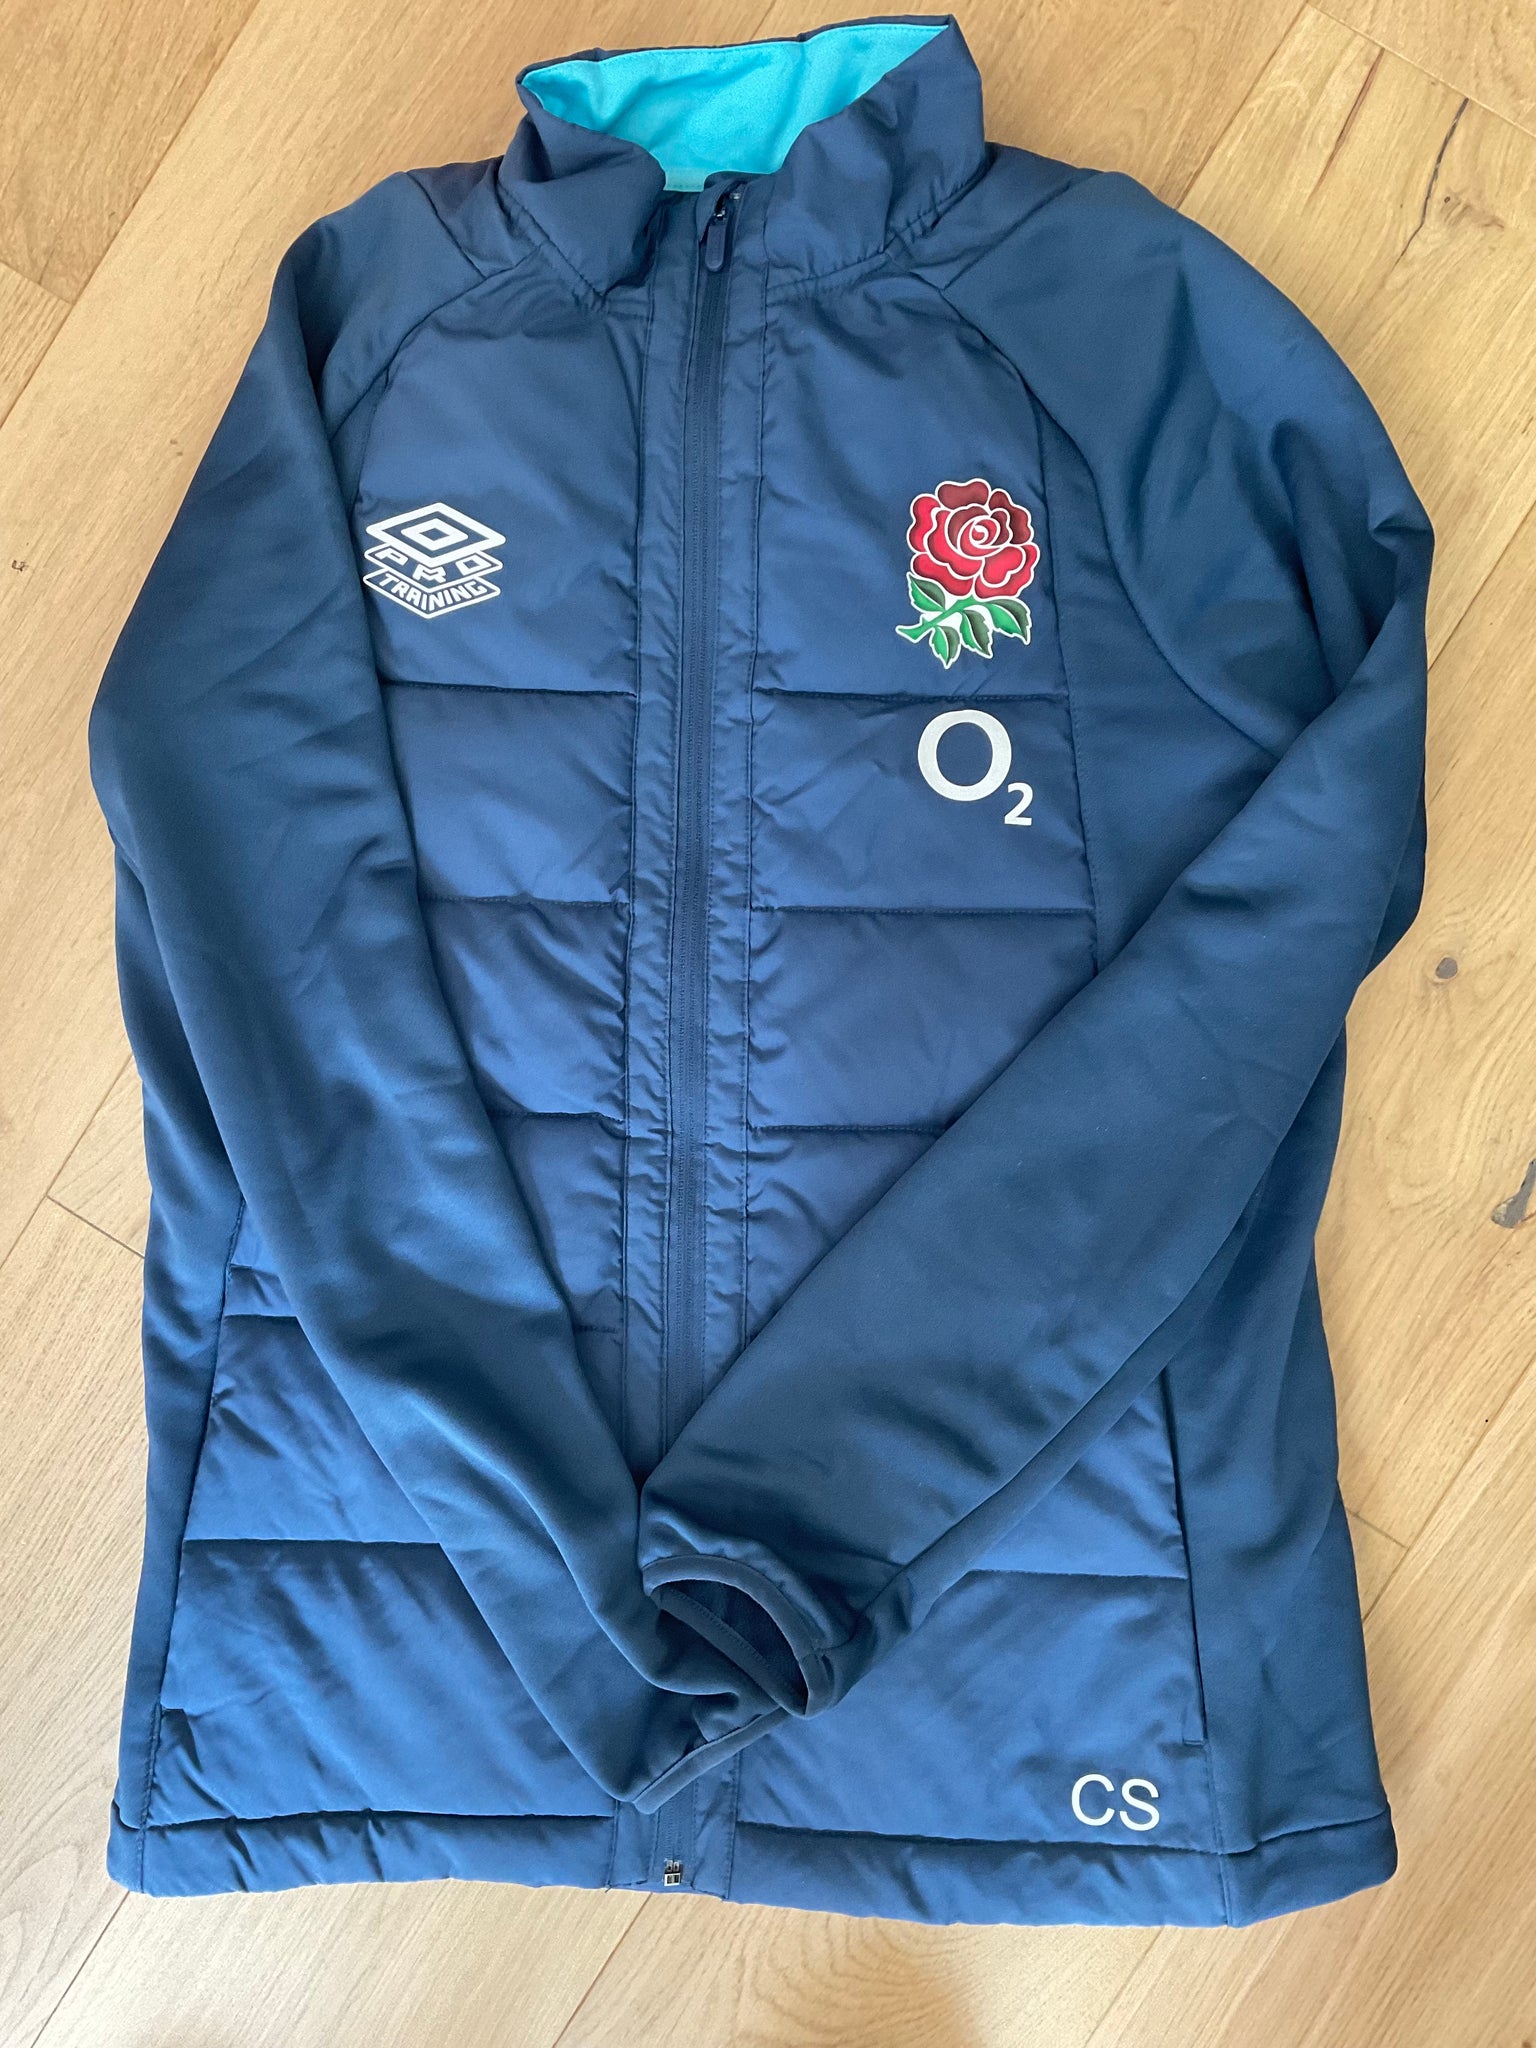 CS Initials - England Rugby Thermal Jacket [Teal]